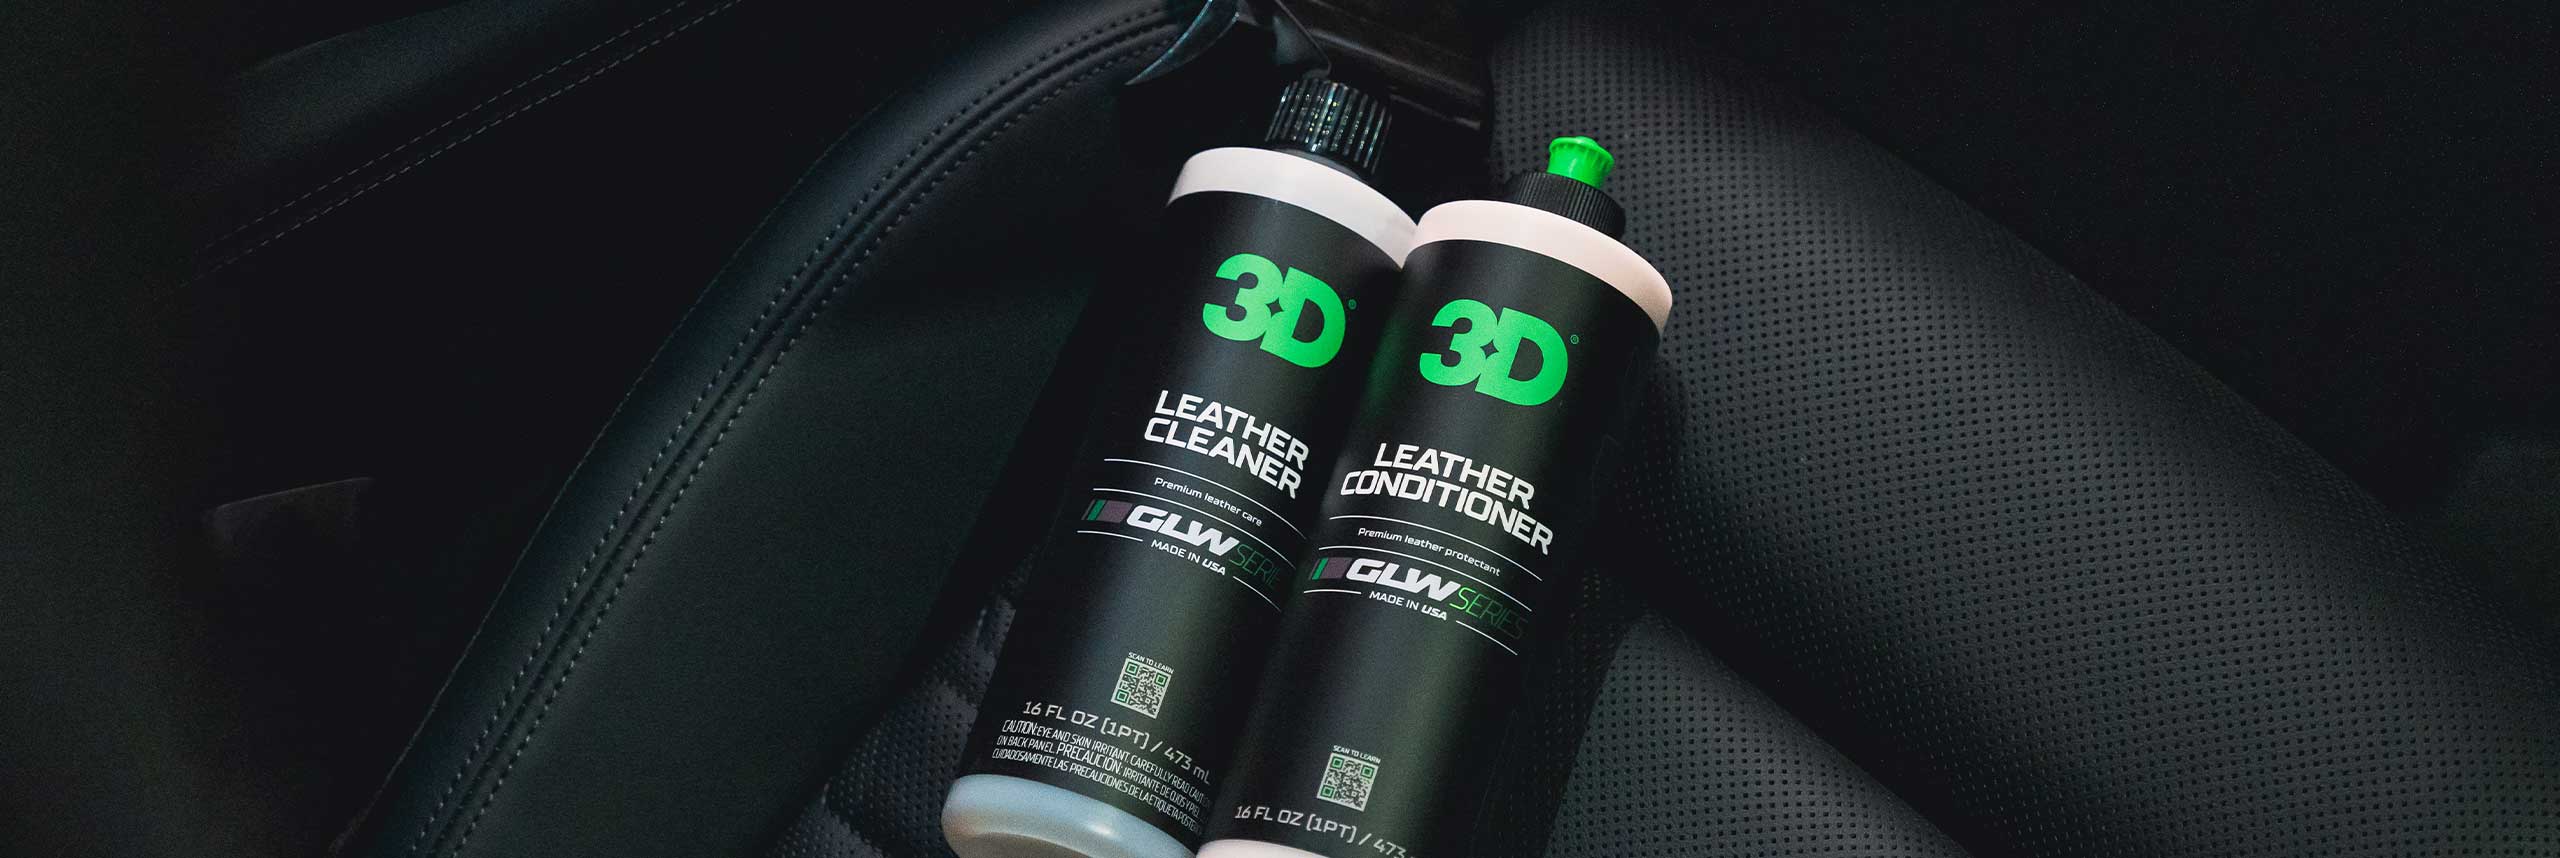 car leather cleaner and leather conditioner on leather car seat